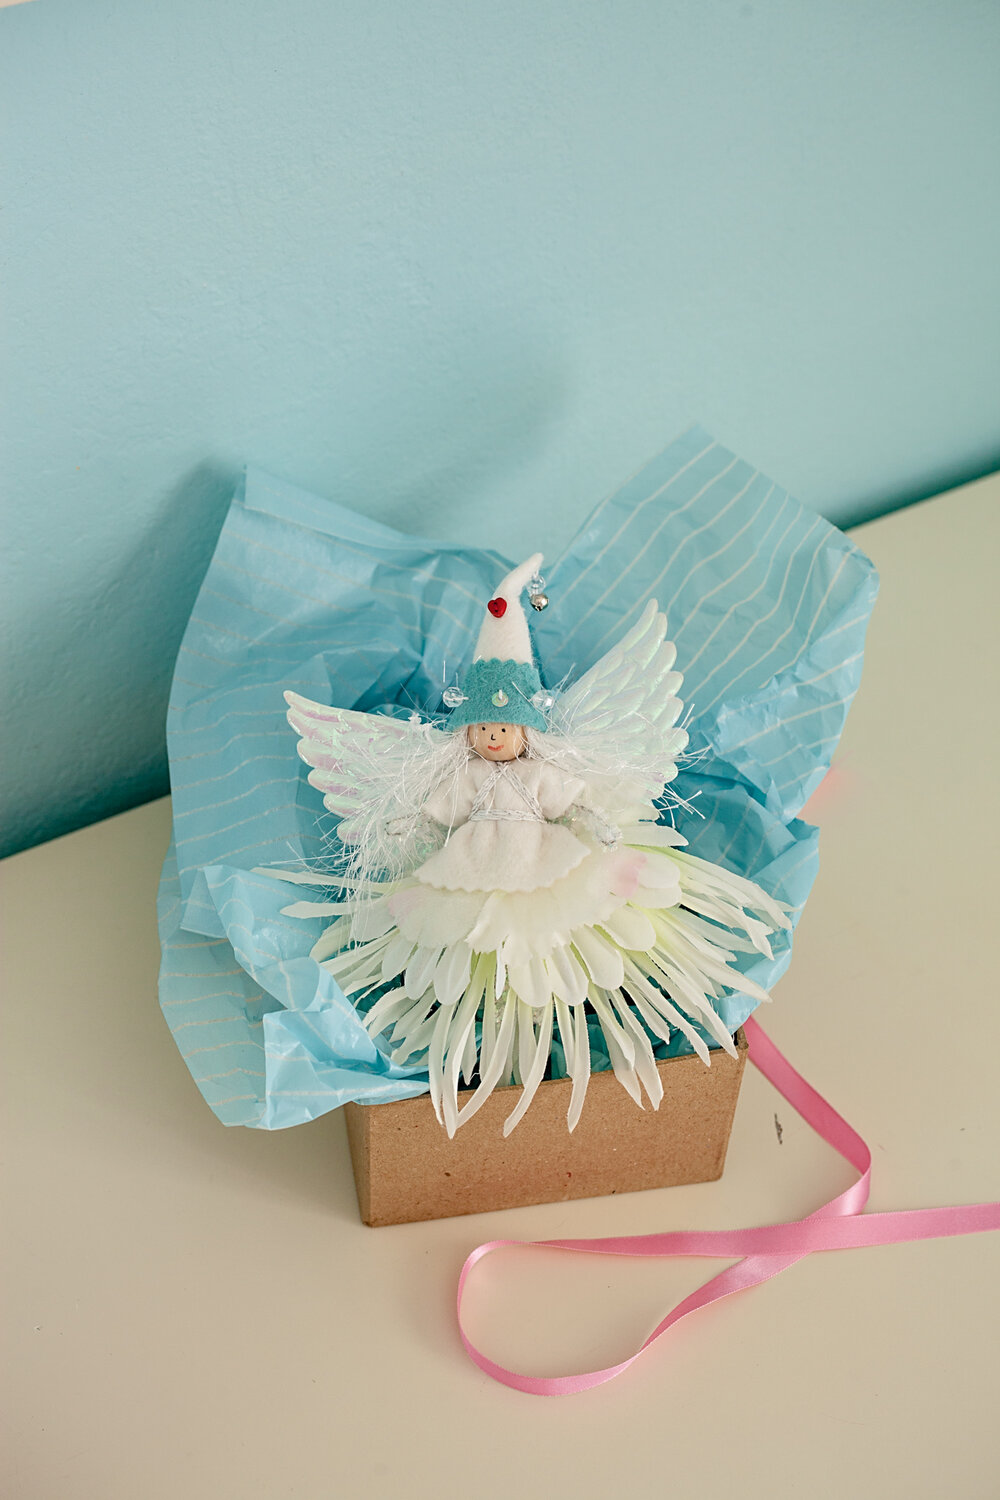 Handmade Holidays with Forest Fairy Crafts for Seasonal Gifts and Decor